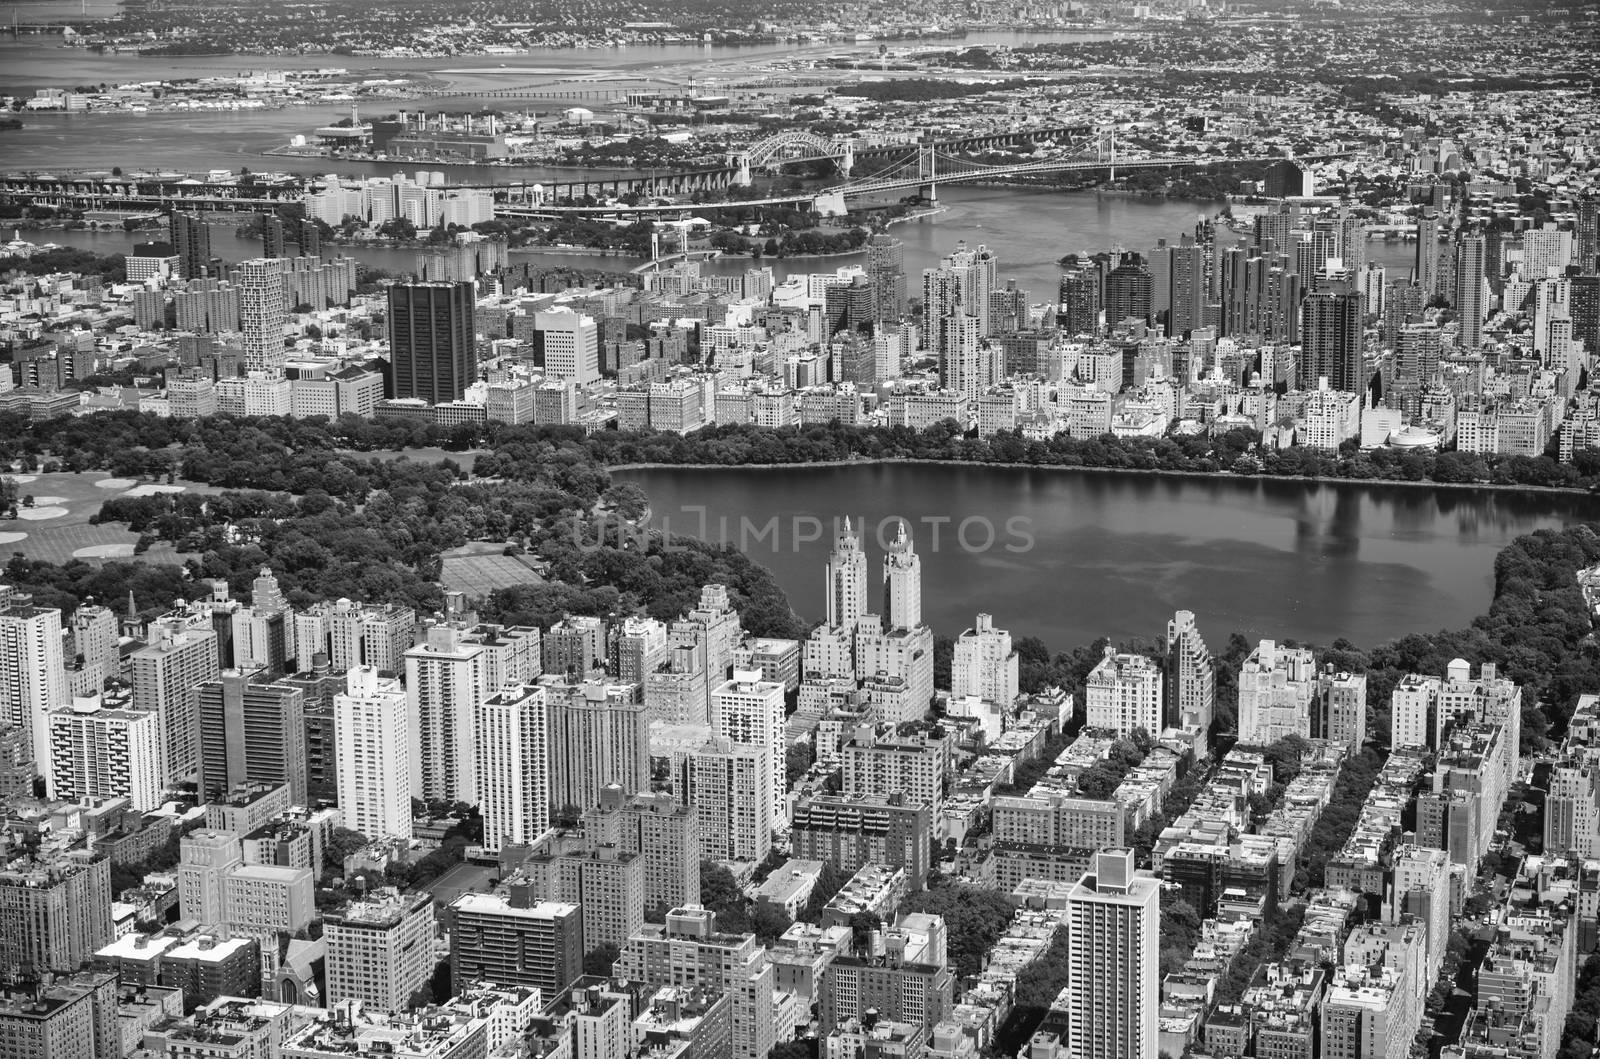 Awesome helicopter view of Jacqueline Kennedy Onassis Reservoir and Central Park with surrounding Skyscrapers - NYC.